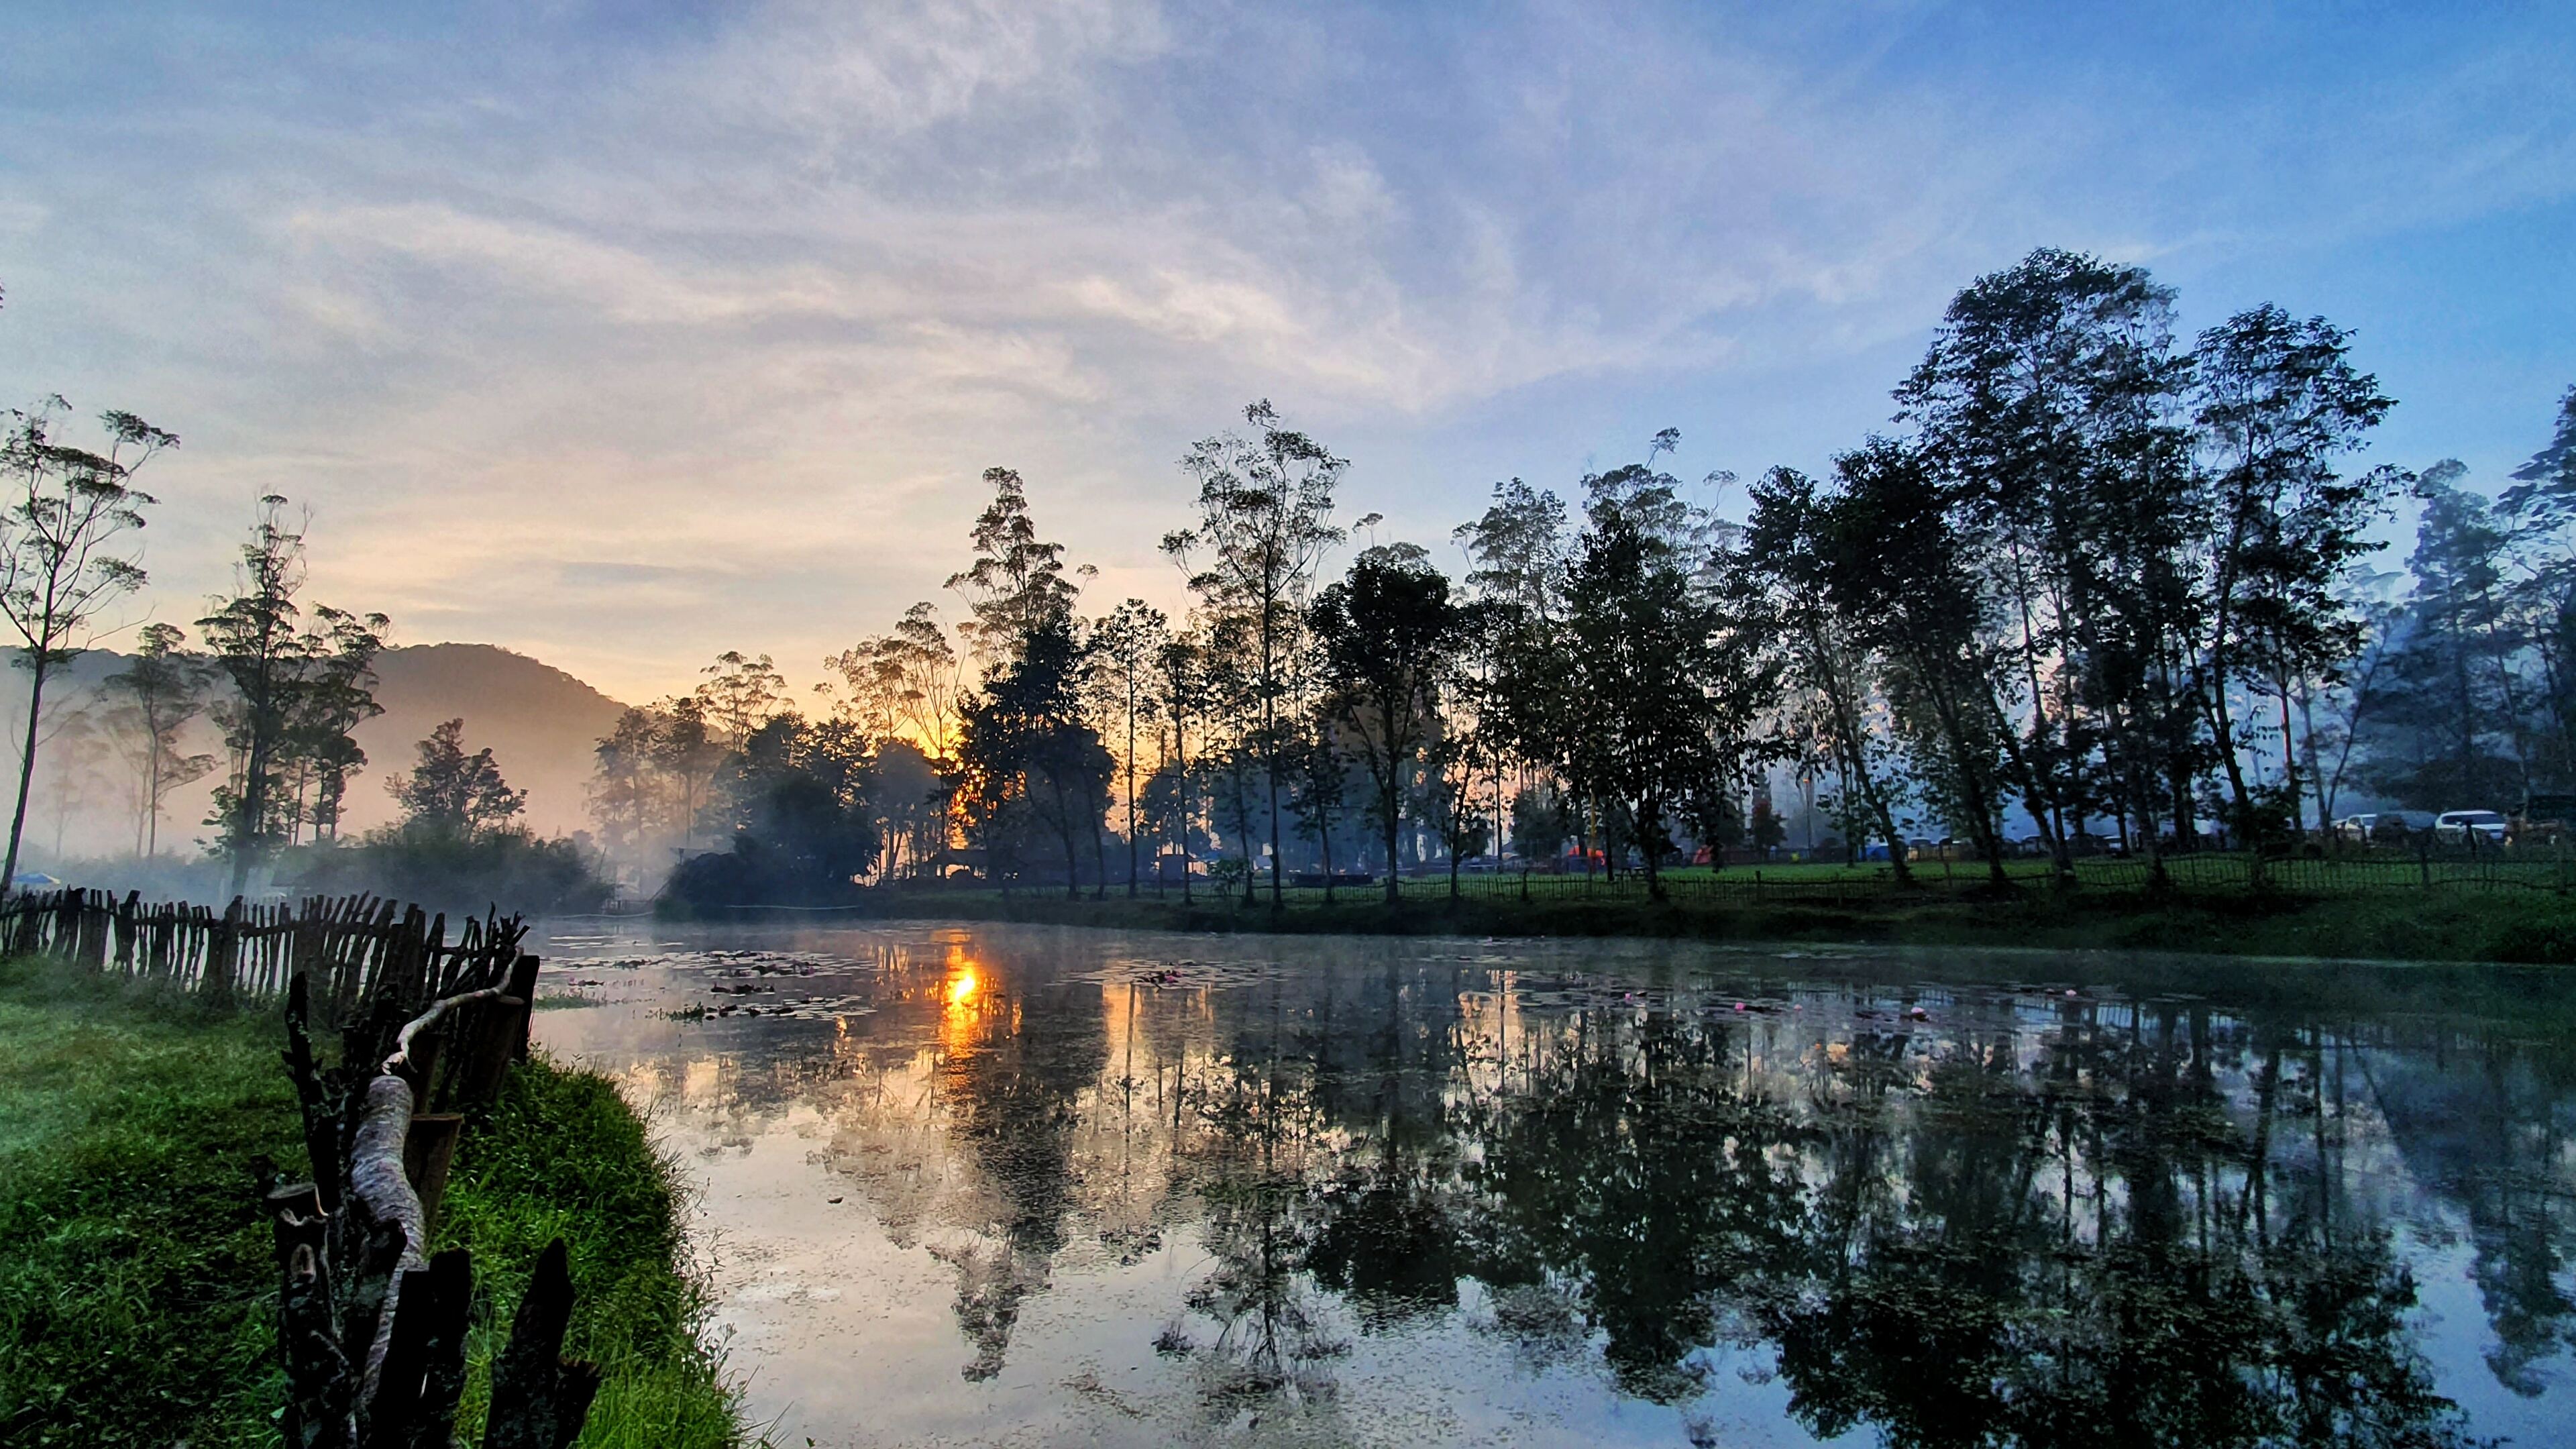 Bandung 4K wallpapers for your desktop or mobile screen free and easy